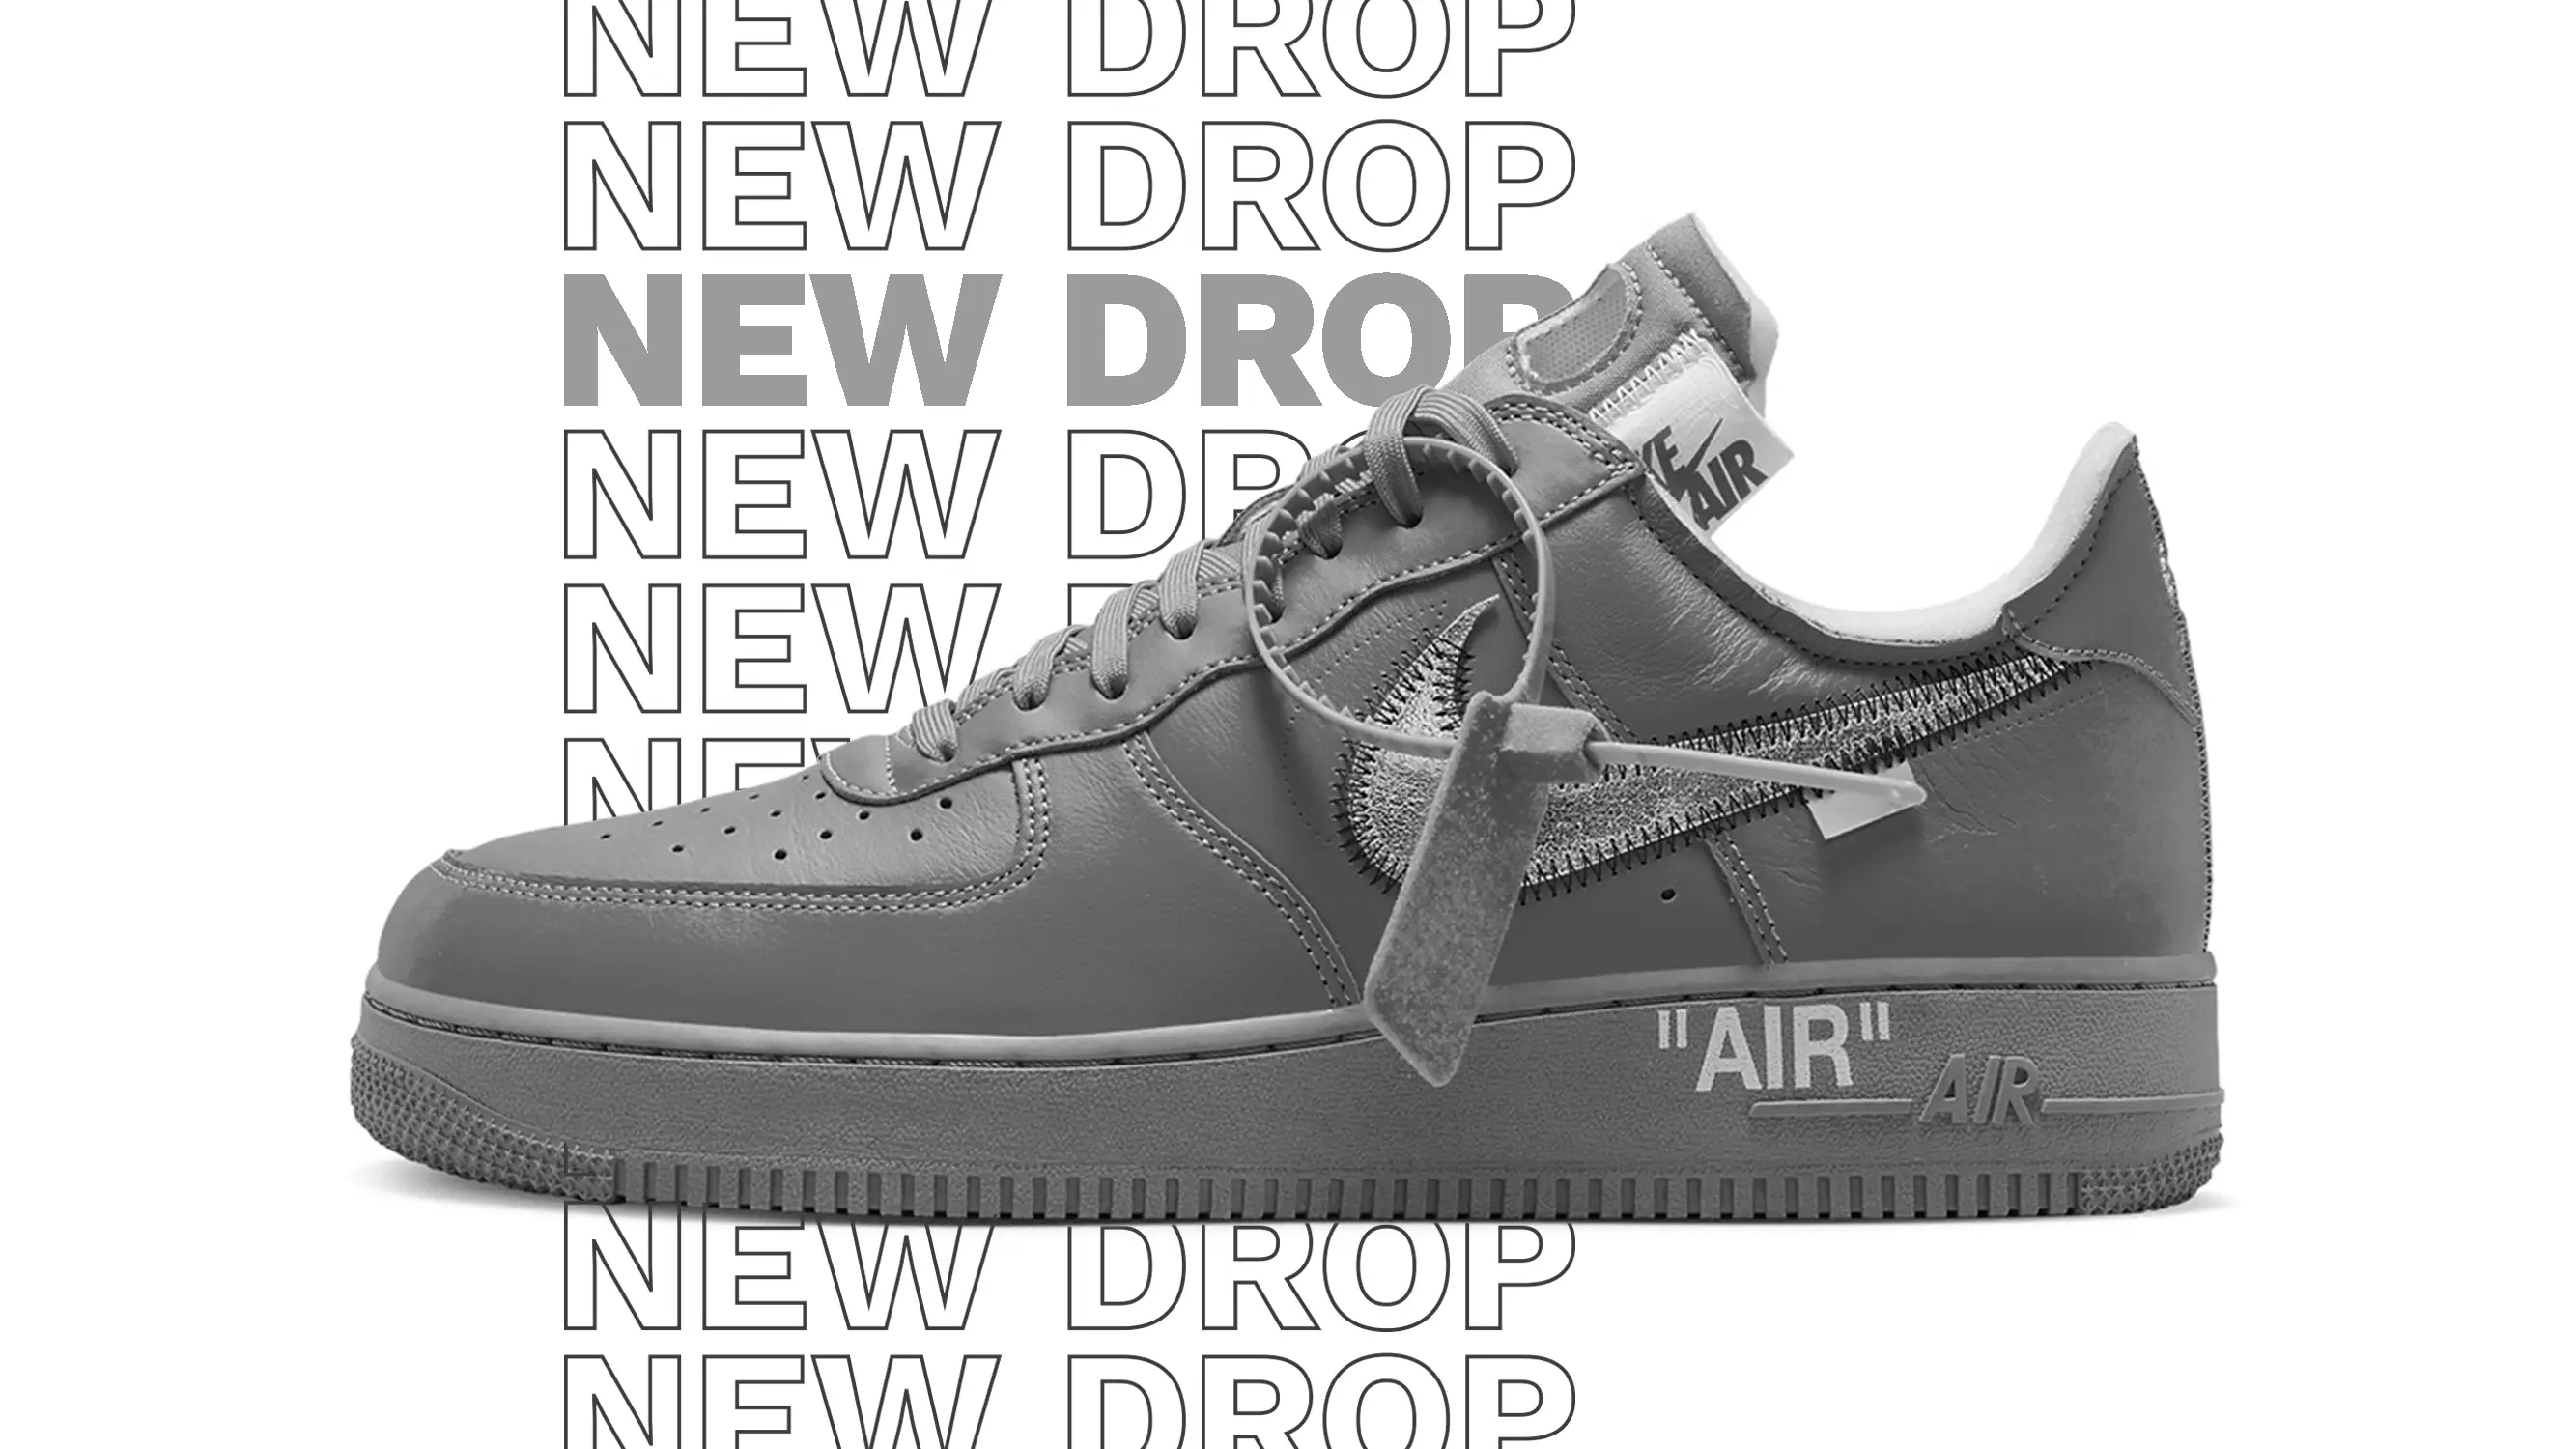 An Off-White x Nike Dunk Low Leather Collection Is Rumored To